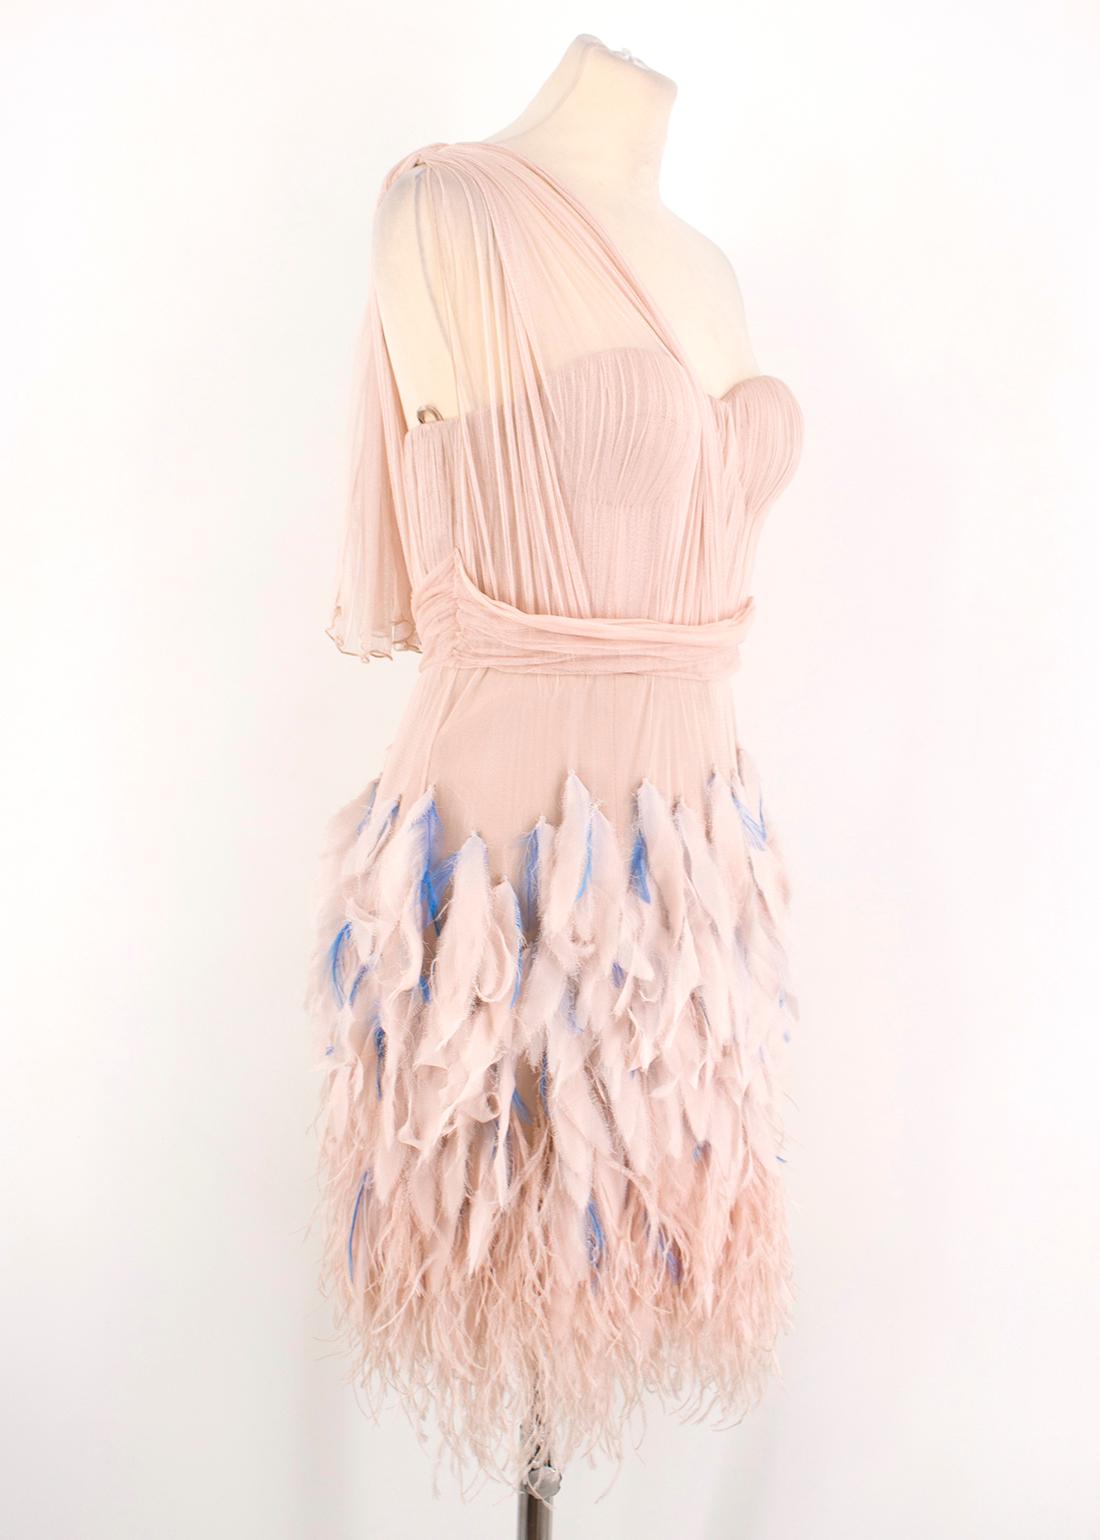 Matthew Williamson Silk & Feather Tulle Dress

- Boned at the bodice
- Feather embellished from the waist down
- Tulle-style
- Draped one shoulder
- Mini-length 
- Sweetheart neckline
- Concealed side zipper with hook and eye fastening

Please note,